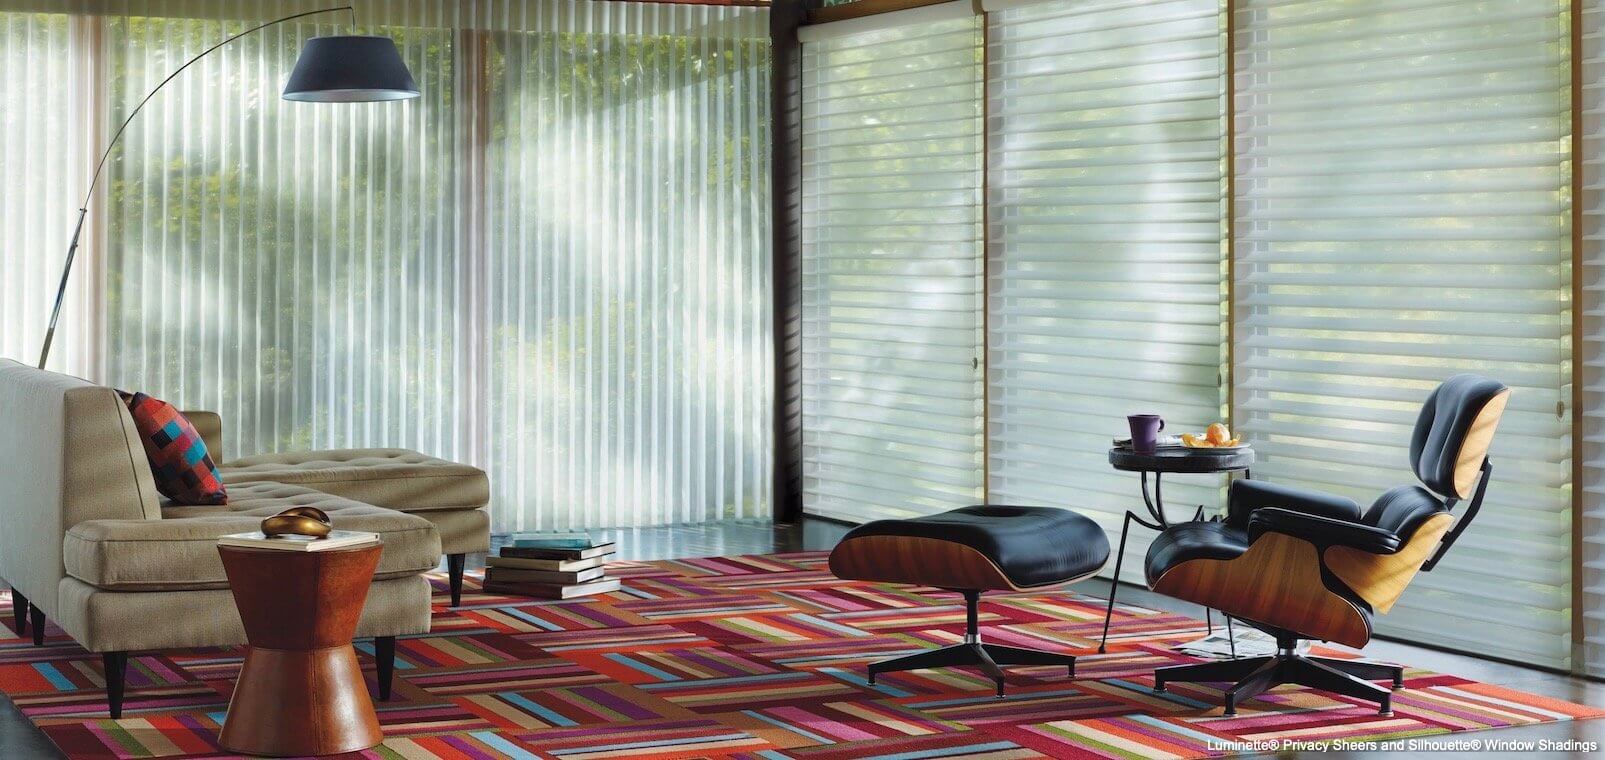 Luminette Privacy Sheers and Silhouette Window Shadings - Originale - Living Room